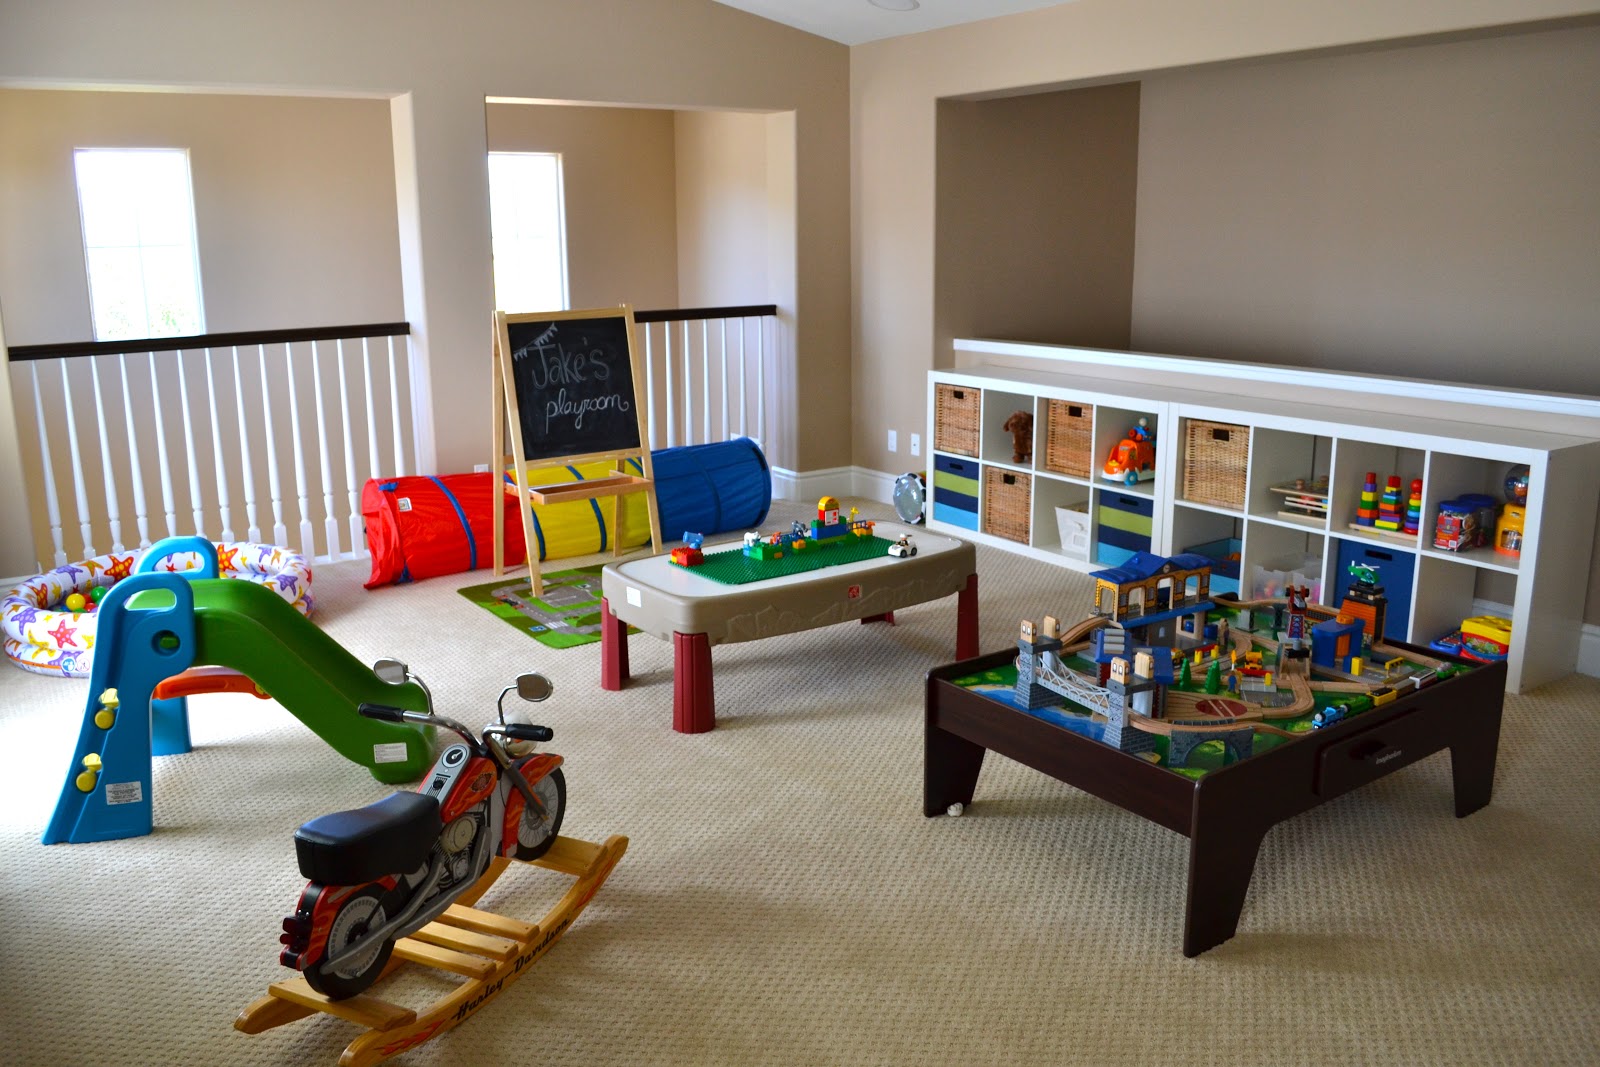 How to Make a Kid's Playroom on a Budget